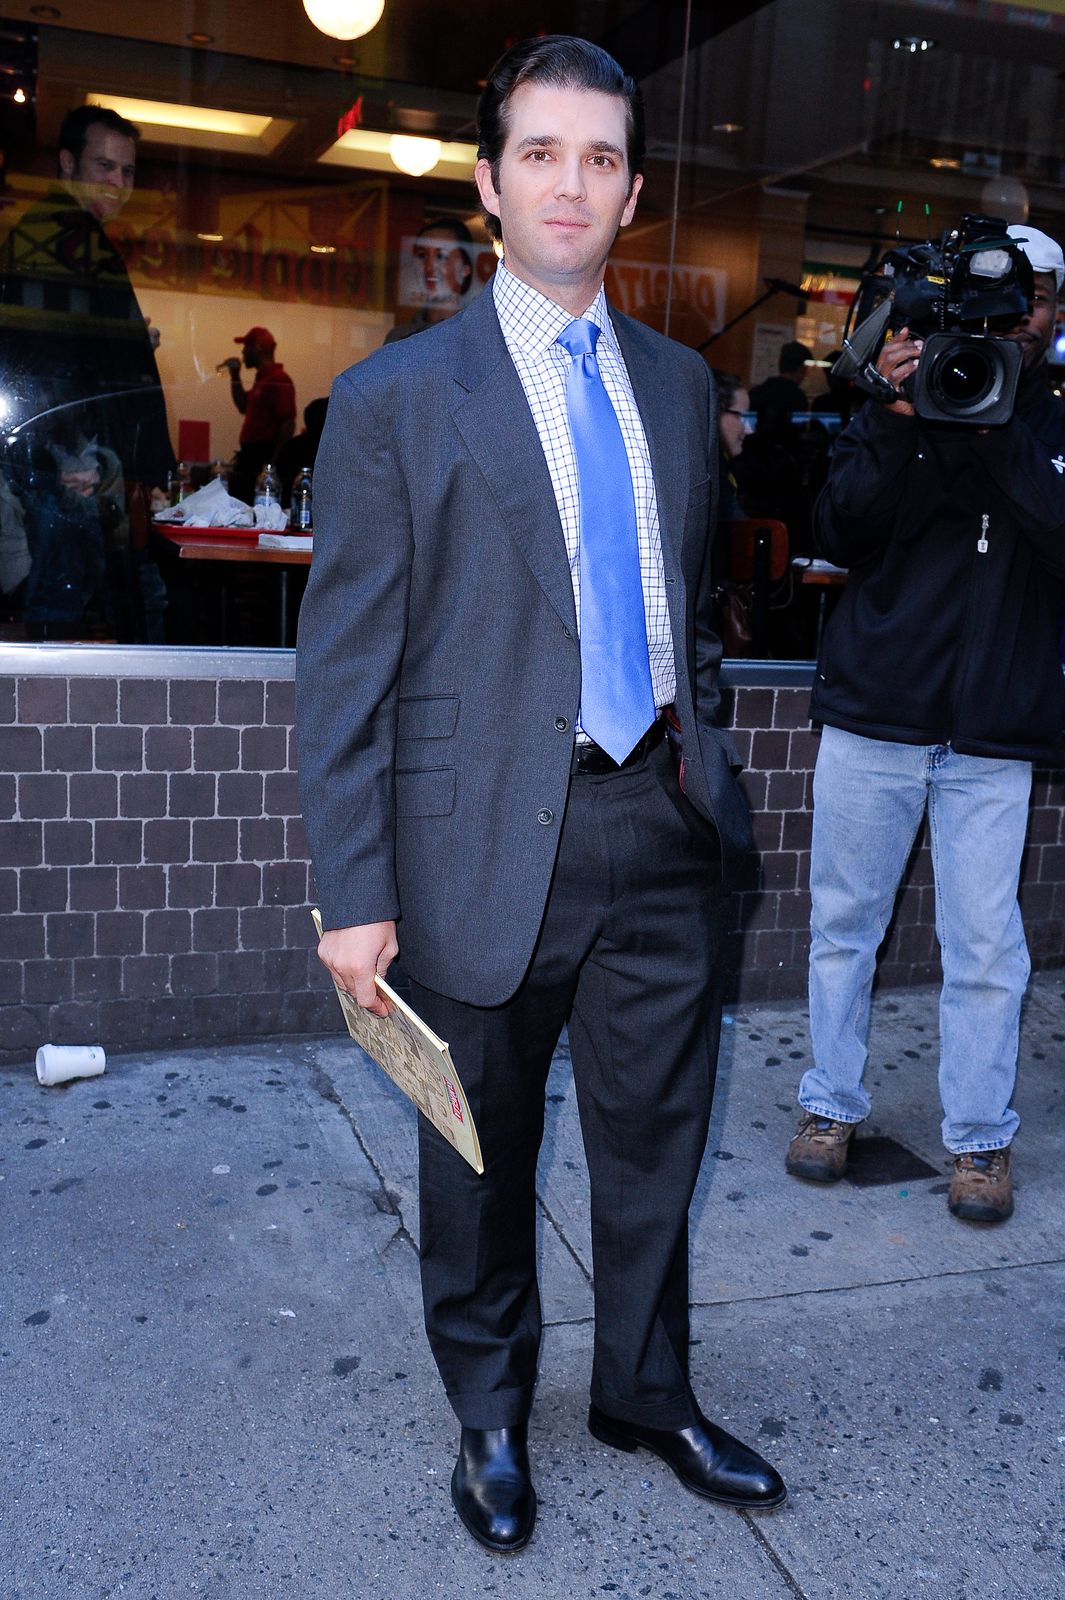 Donald Trump Jr. at the "Celebrity Apprentice" film set at Famiglia Restaurant on October 19, 2010, in New York City | Photo: Ray Tamarra/Getty Images